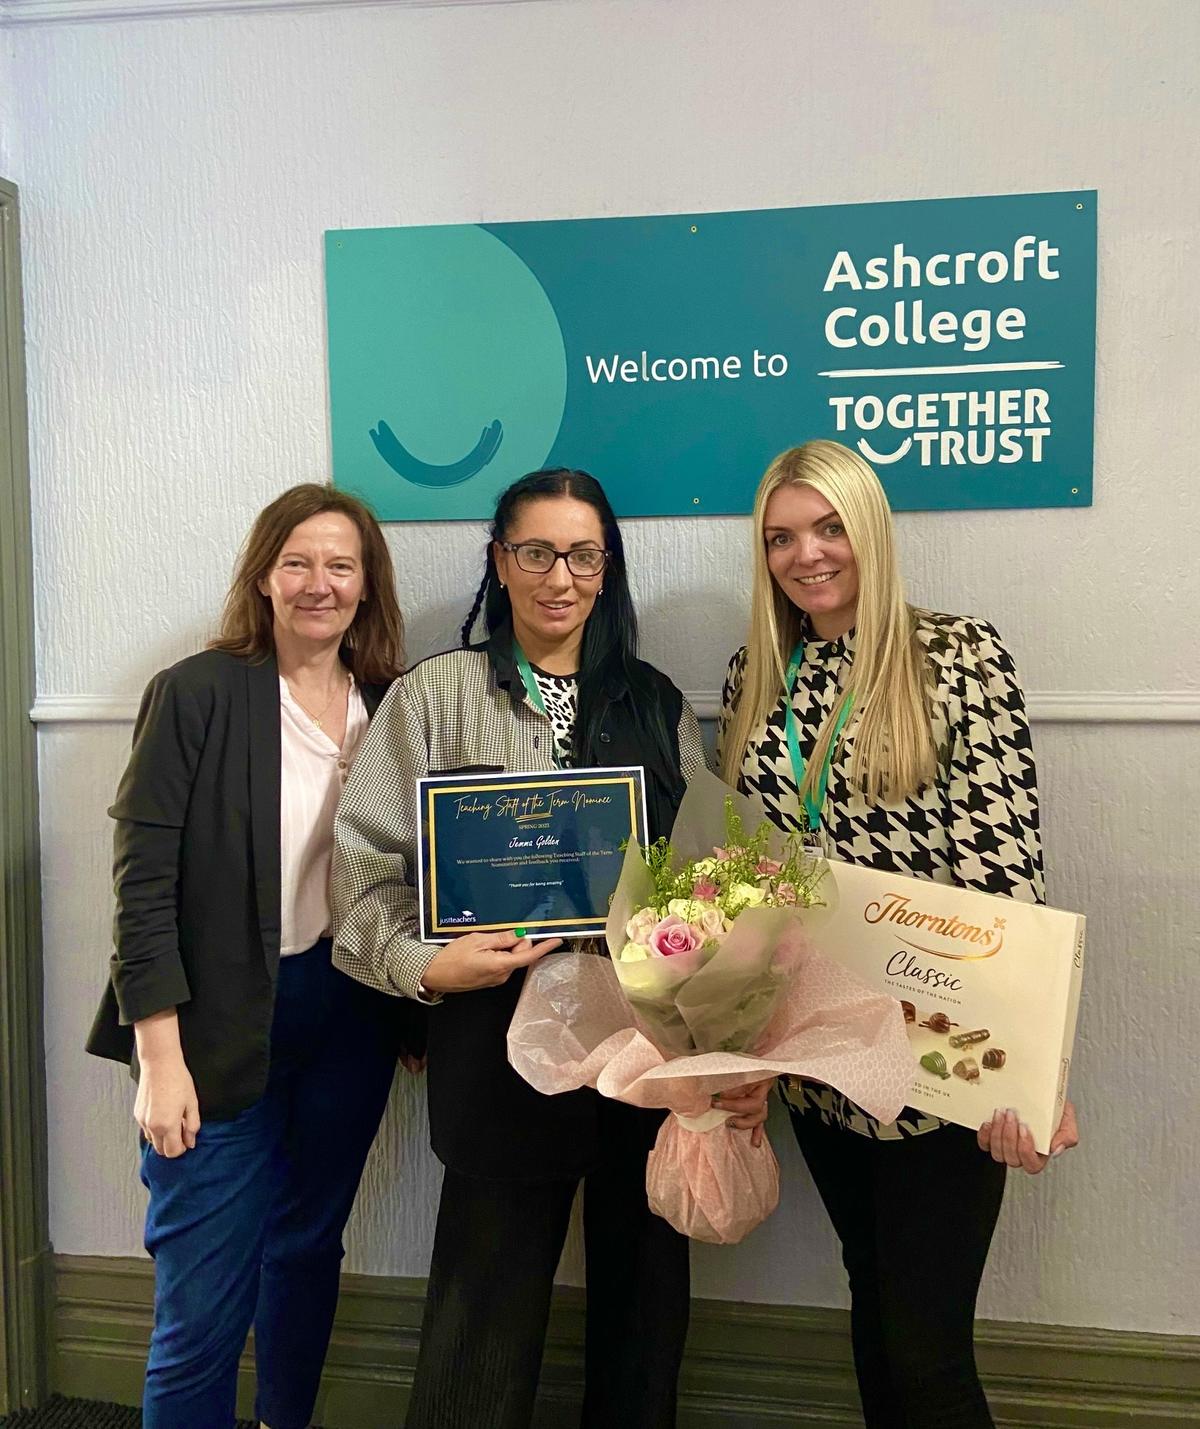 Image shows Jane Embury, Operations Manager at Justteachers, Jemma Golden, holding her certificate, a box of chocolates and flowers, and Leigh Fleming, Pastoral Lead at Ashcroft College